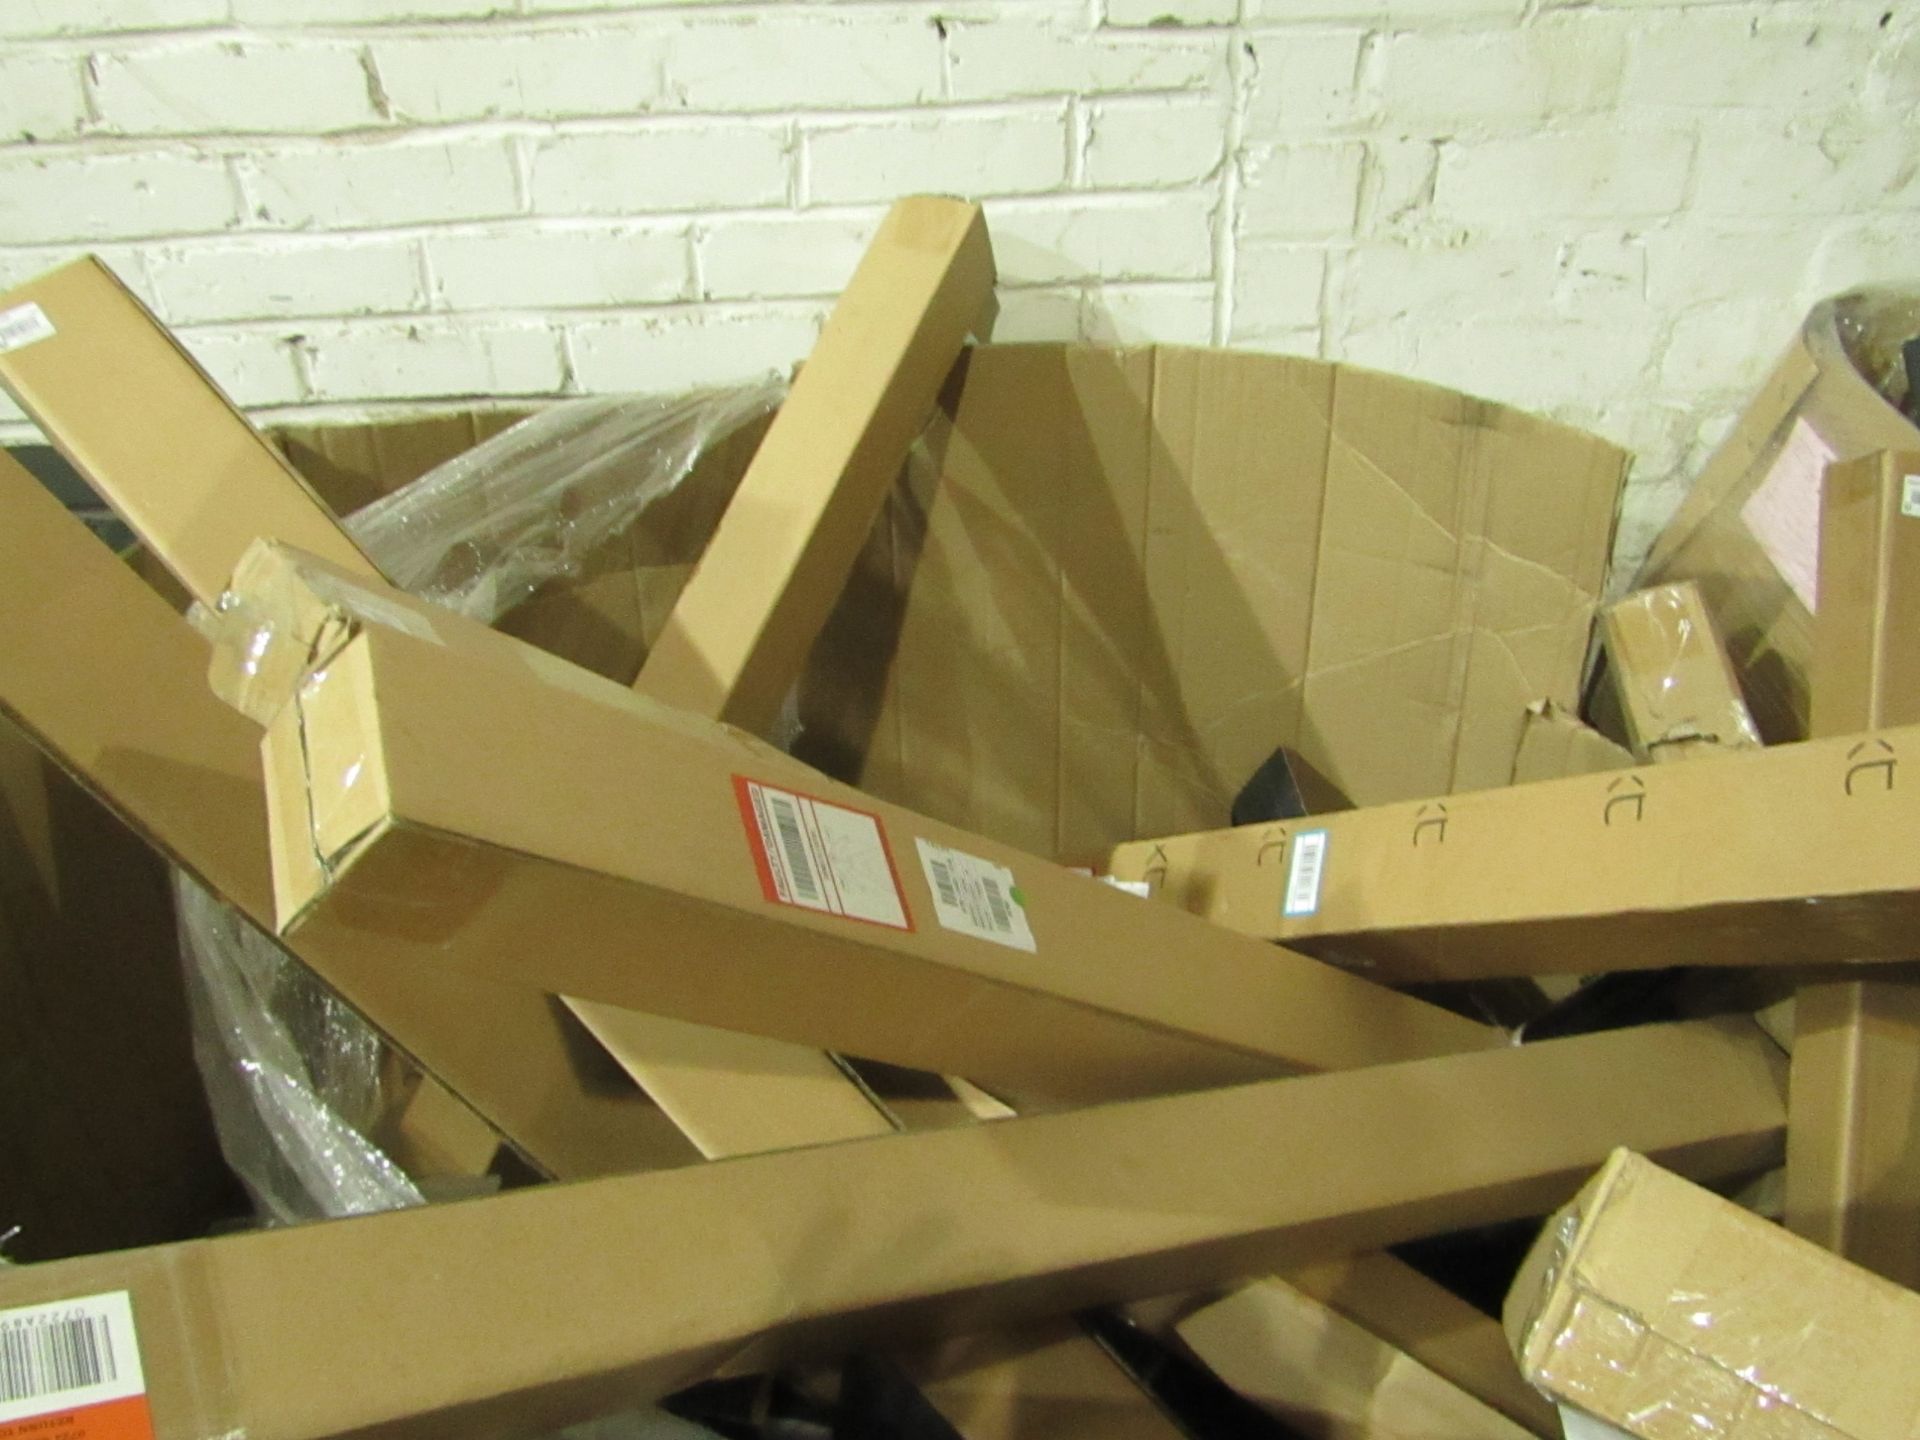 Pallet of Approx 30 Next pre lit twigs, unknown colour but typically most pallets contain a mix of - Image 2 of 2